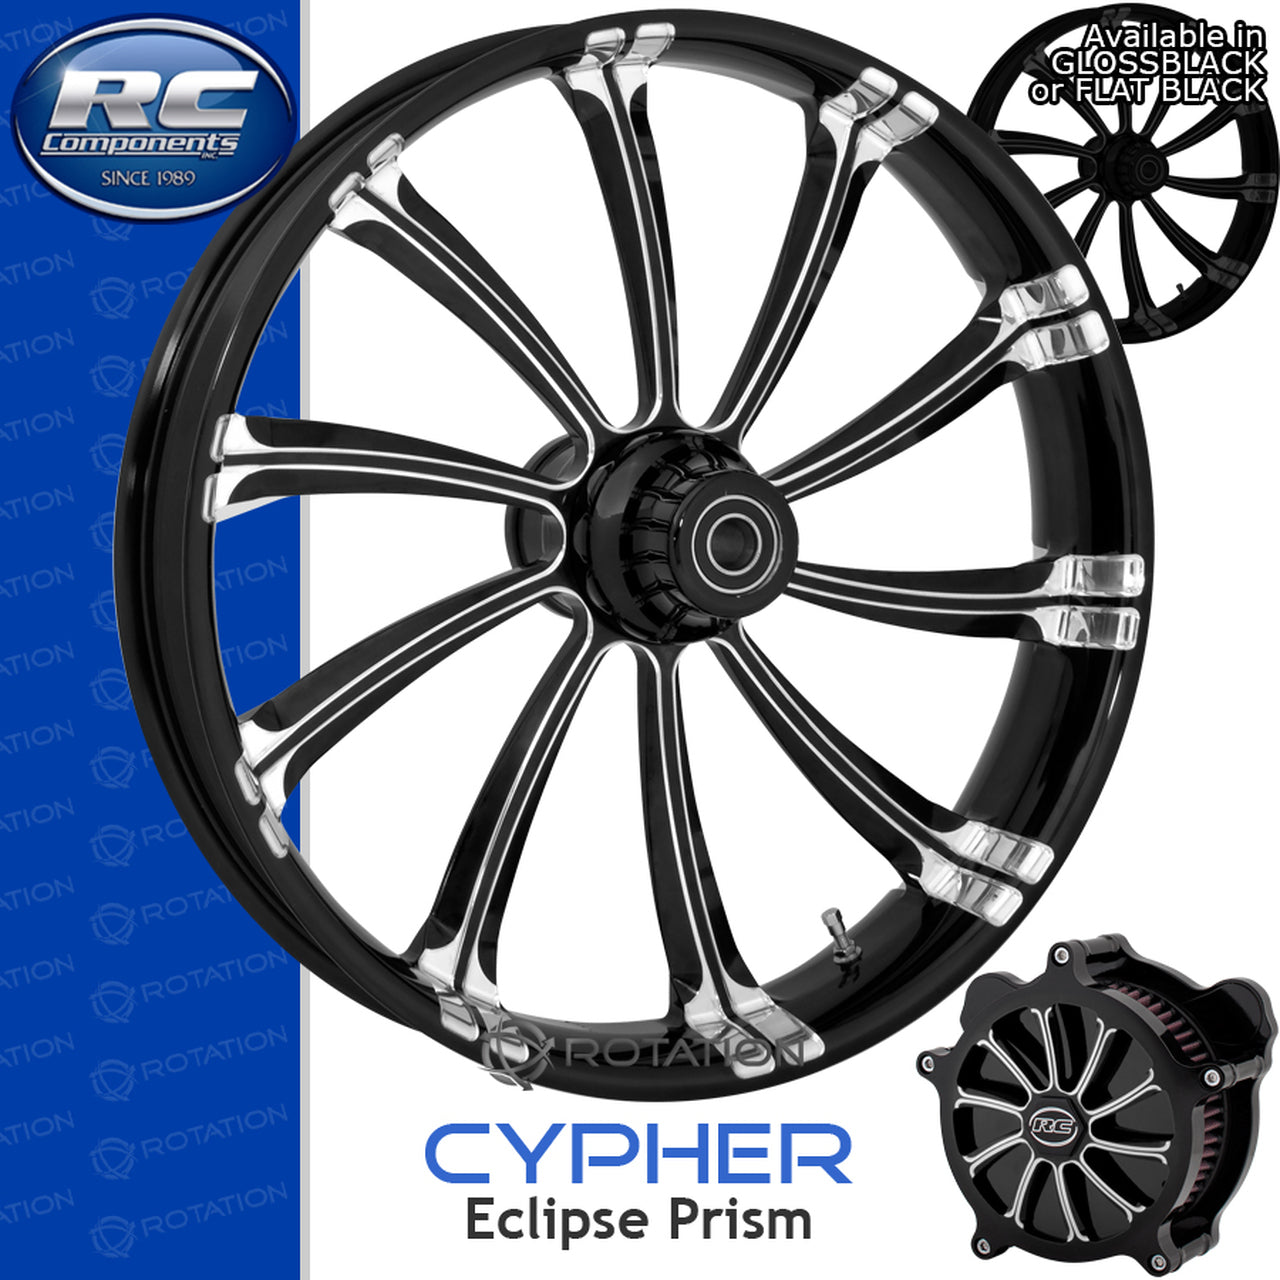 RC Components Cypher Eclipse Touring Wheel